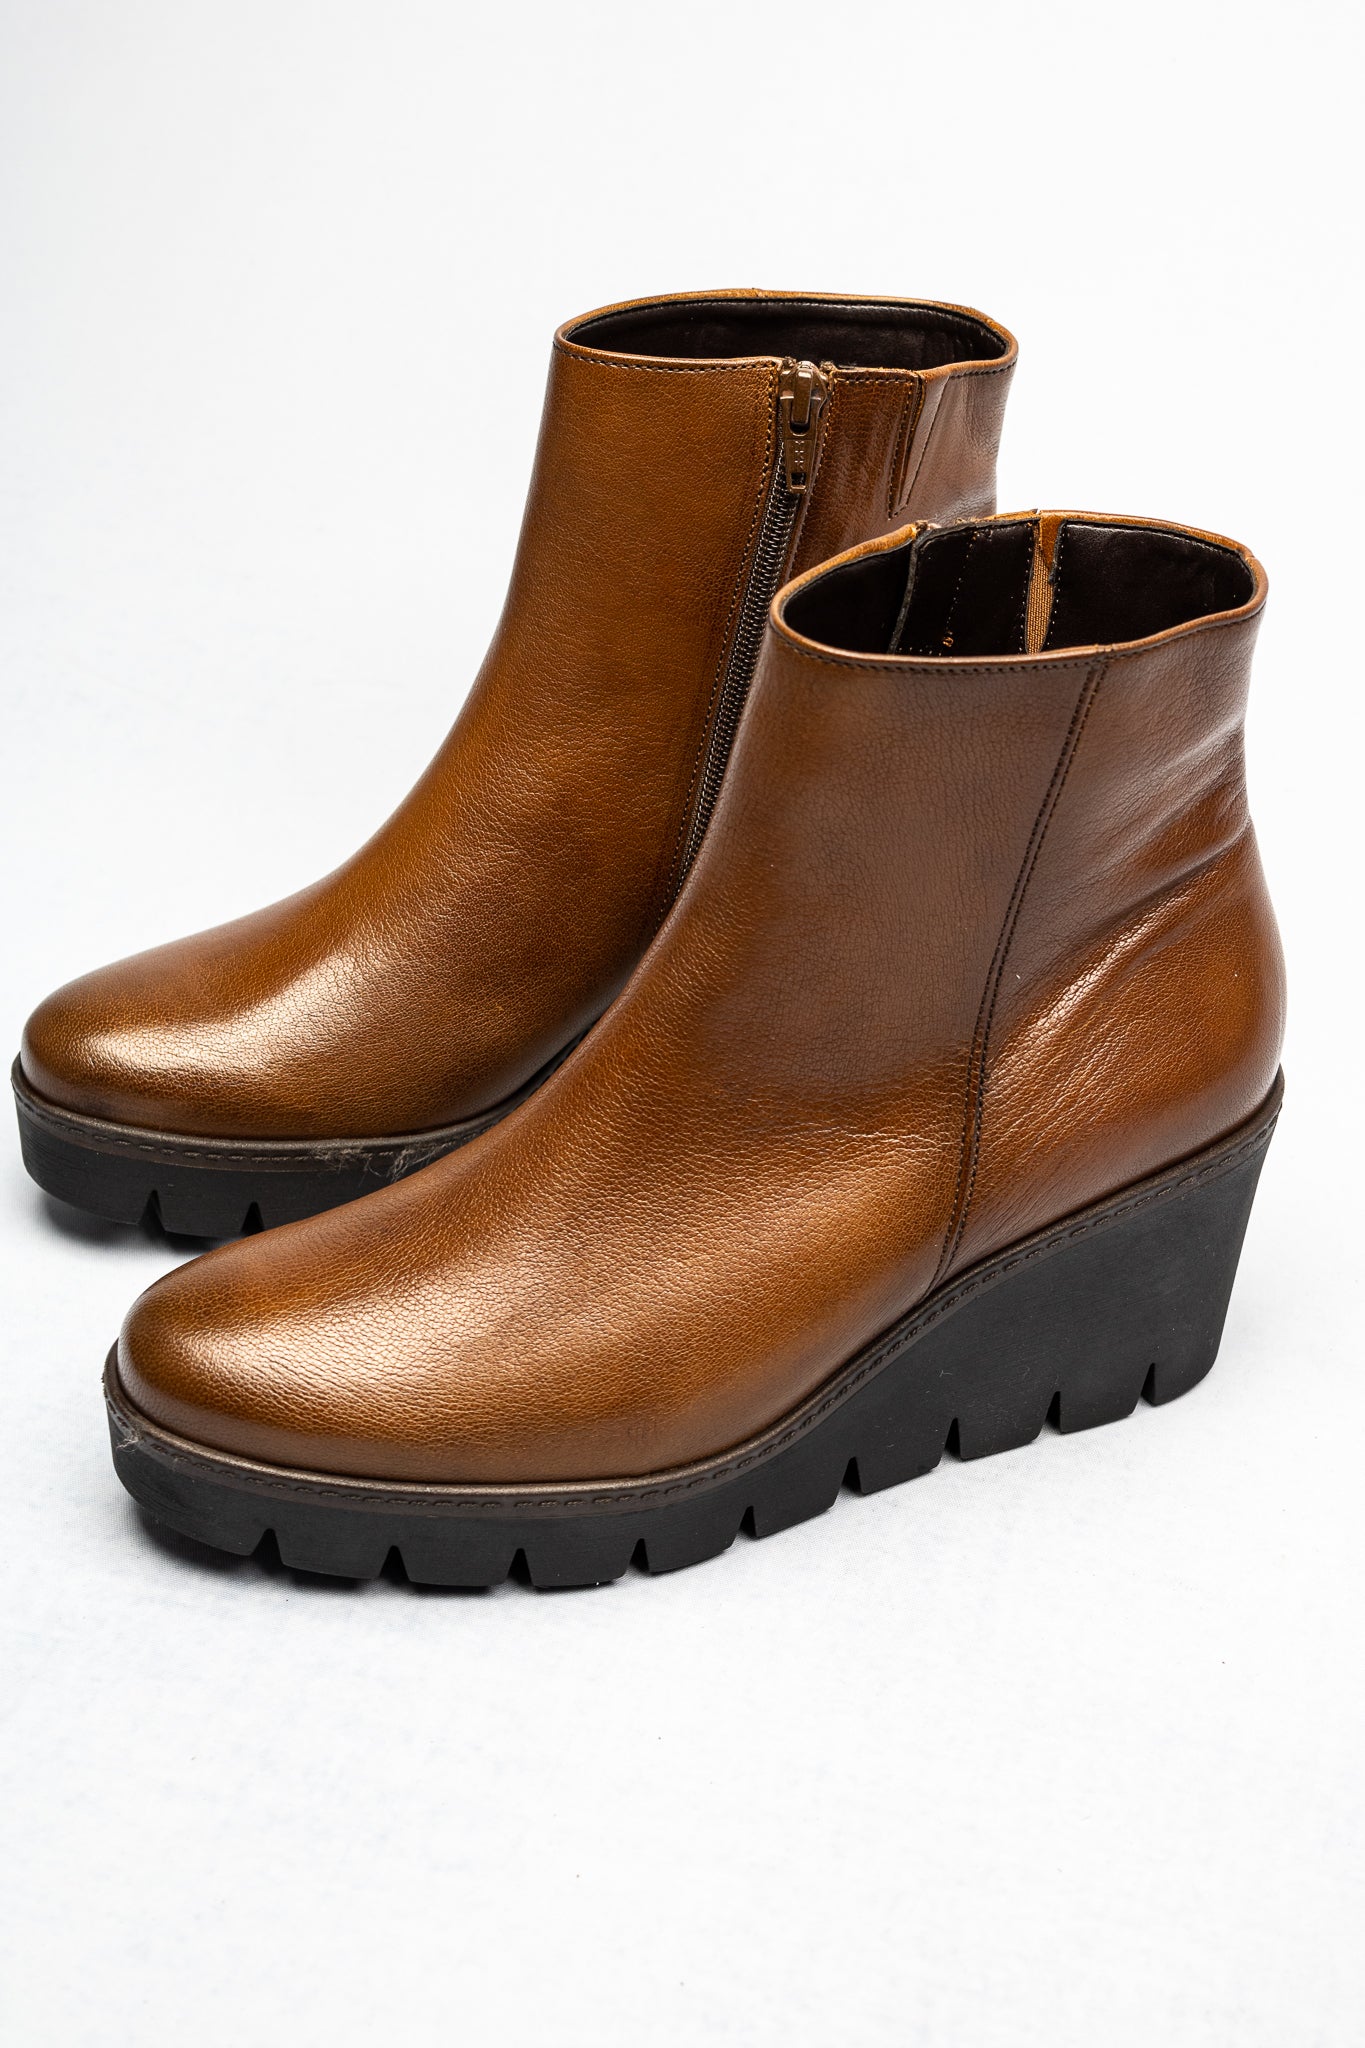 wedge ankle boots ireland